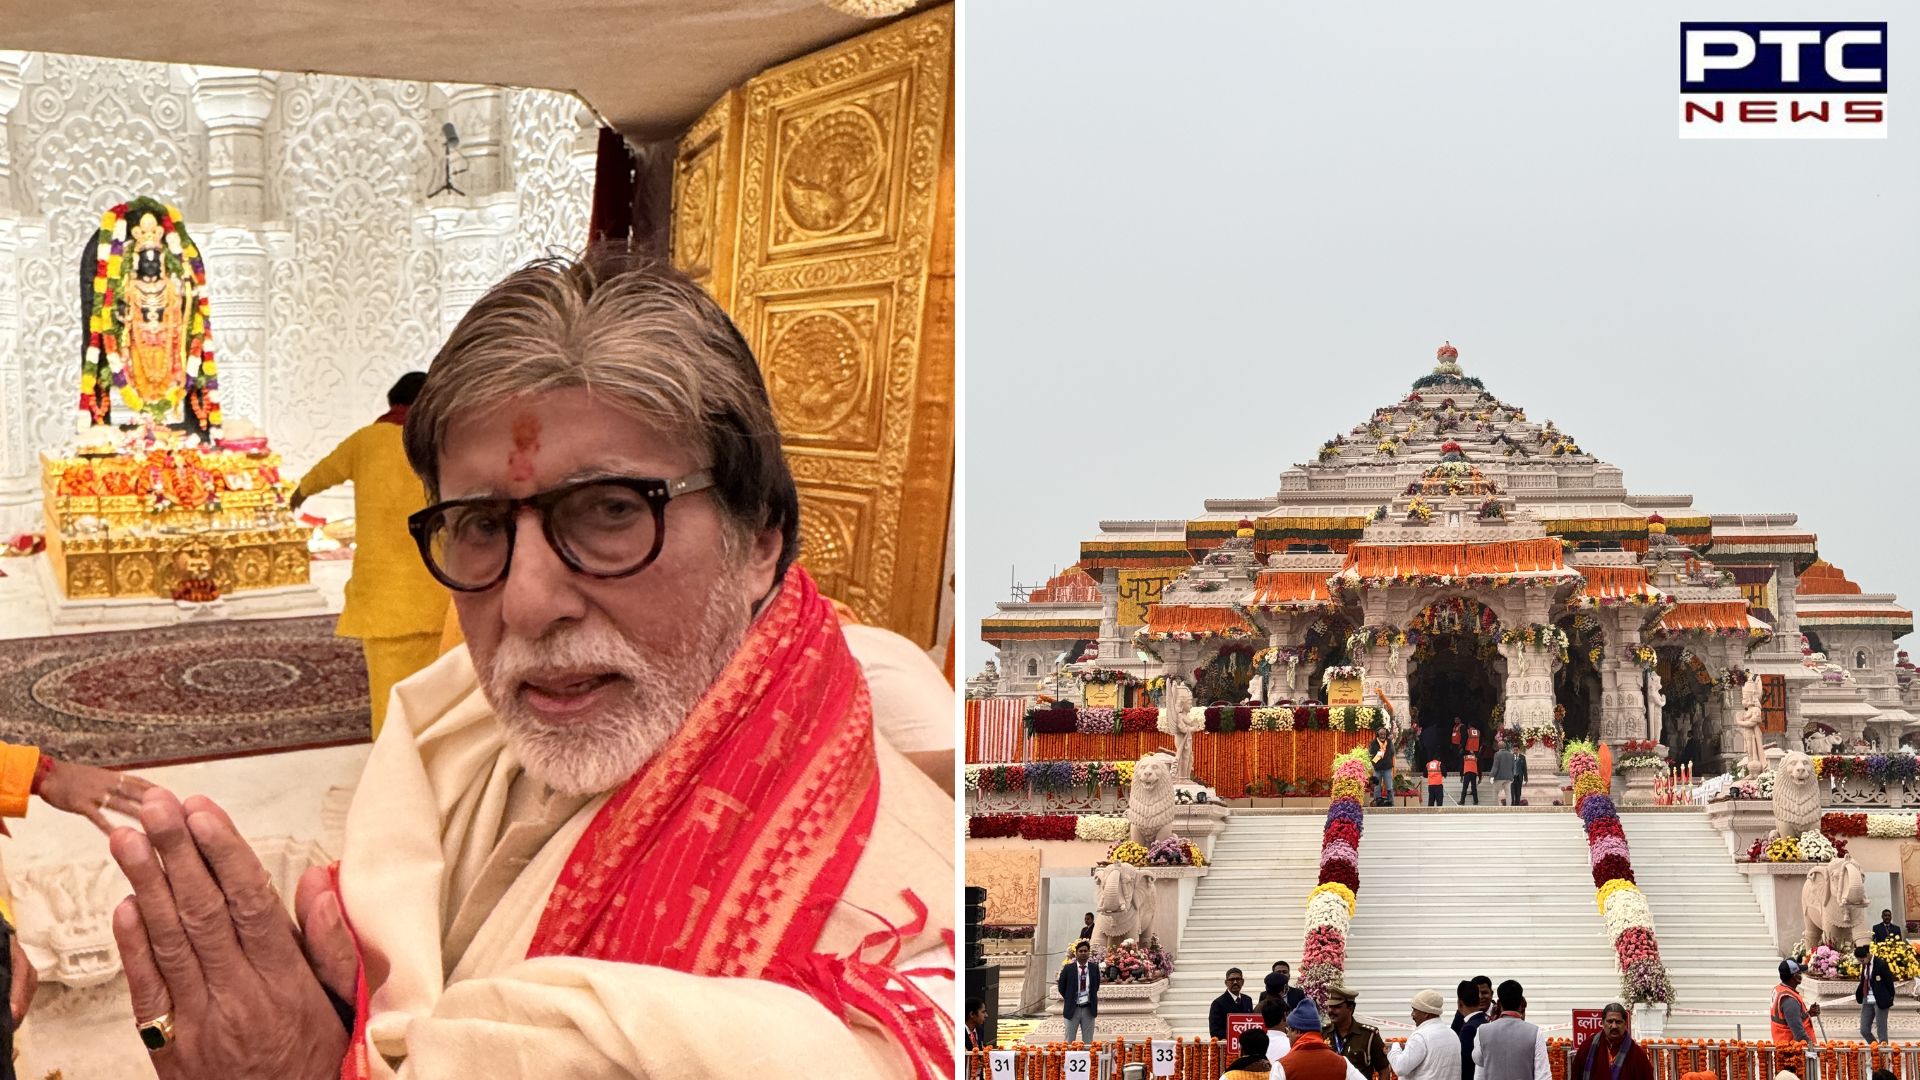 SEE PICS: Big B shares unseen pics with Ram Lalla idol in Ayodhya